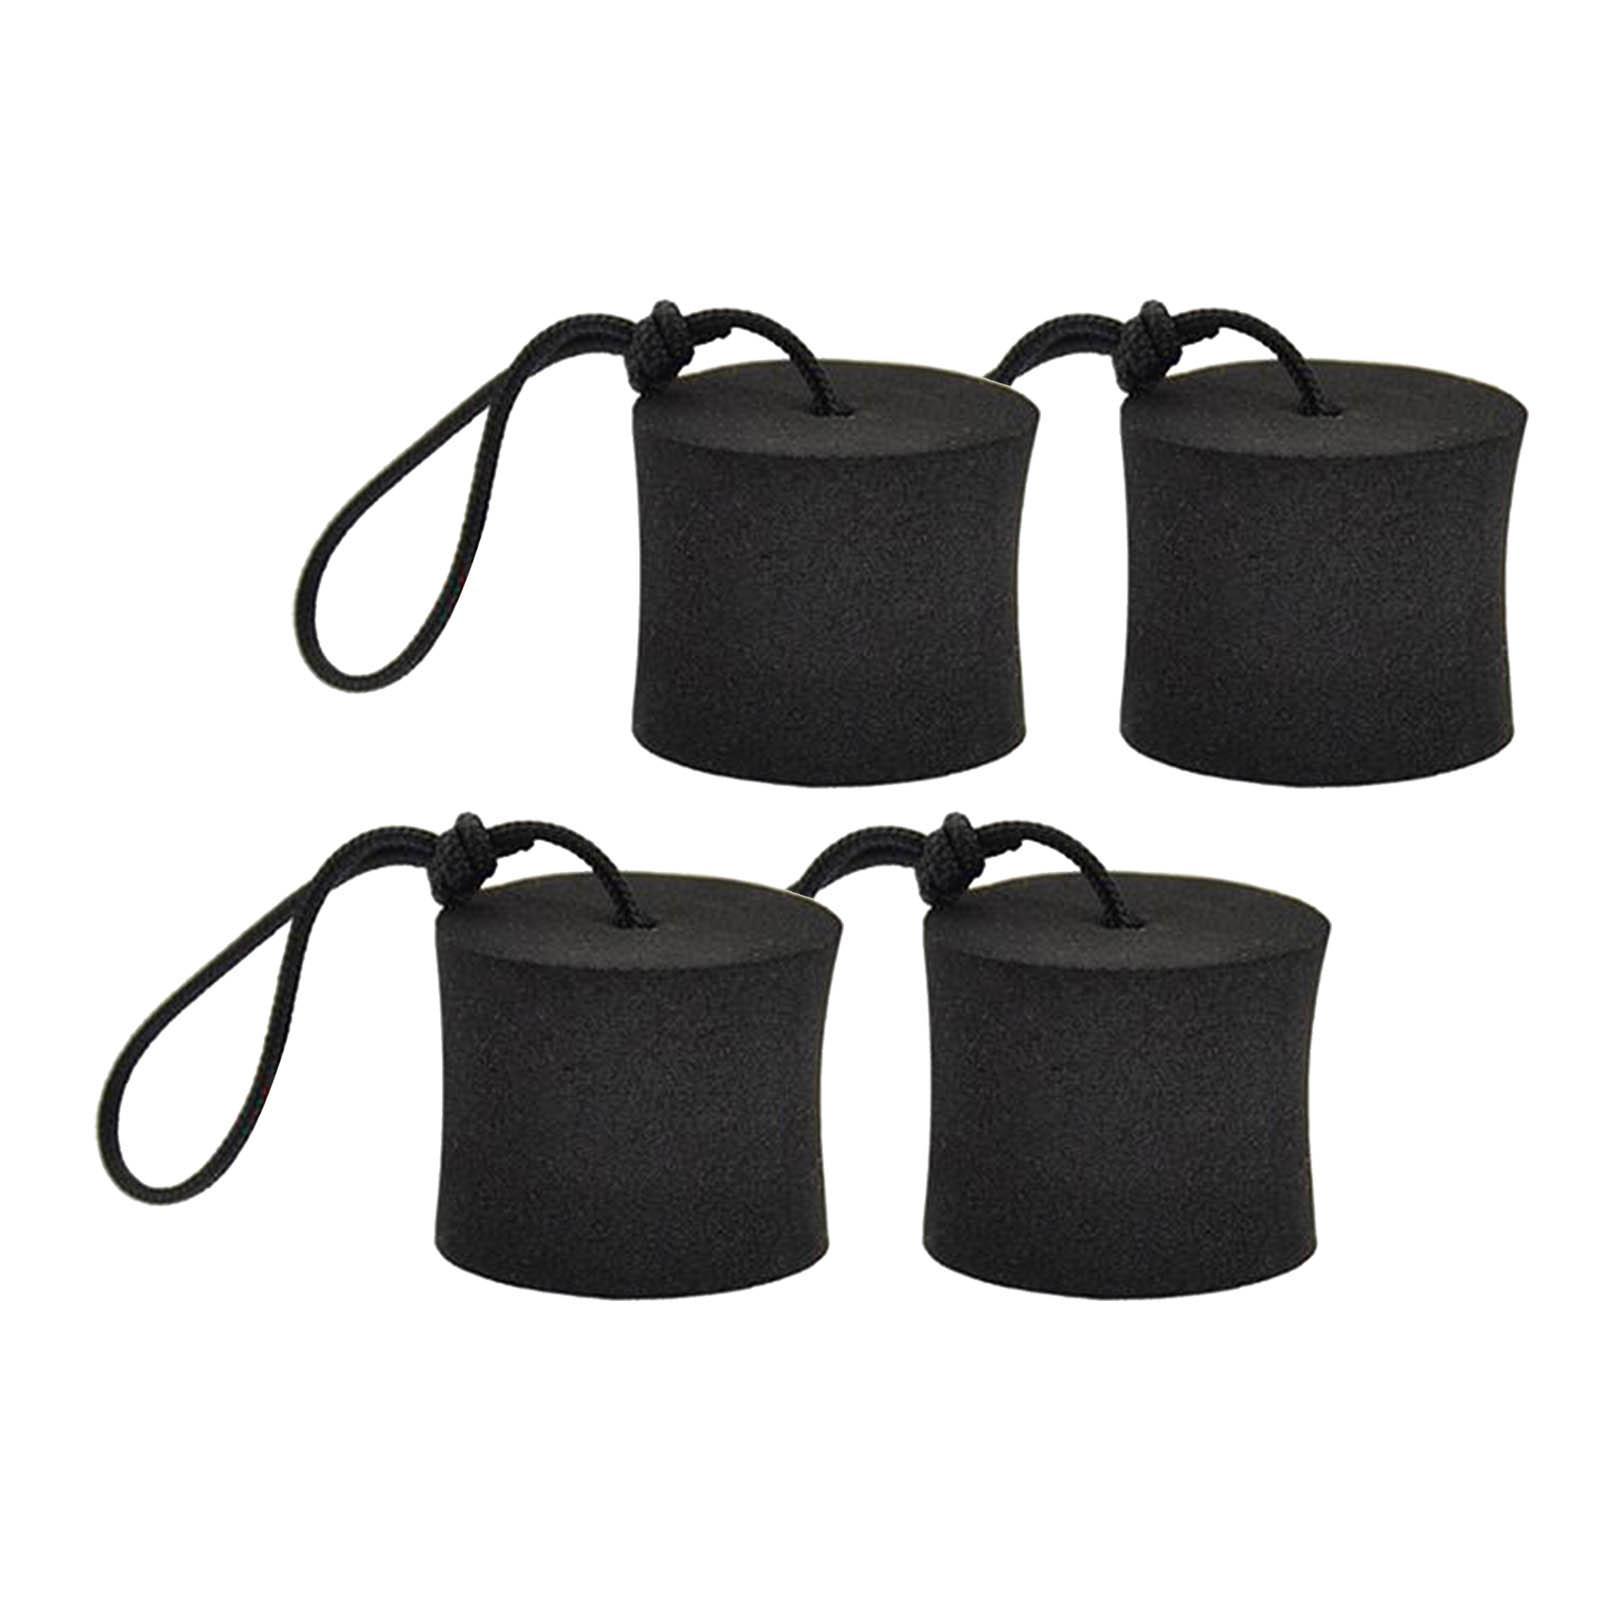 4Pcs Kayak Scupper Plug with Lanyard Multipurpose Durable Replacement Part Canoe Drain Holes Stopper Bung for Inflatable Boat Old Town Kayak